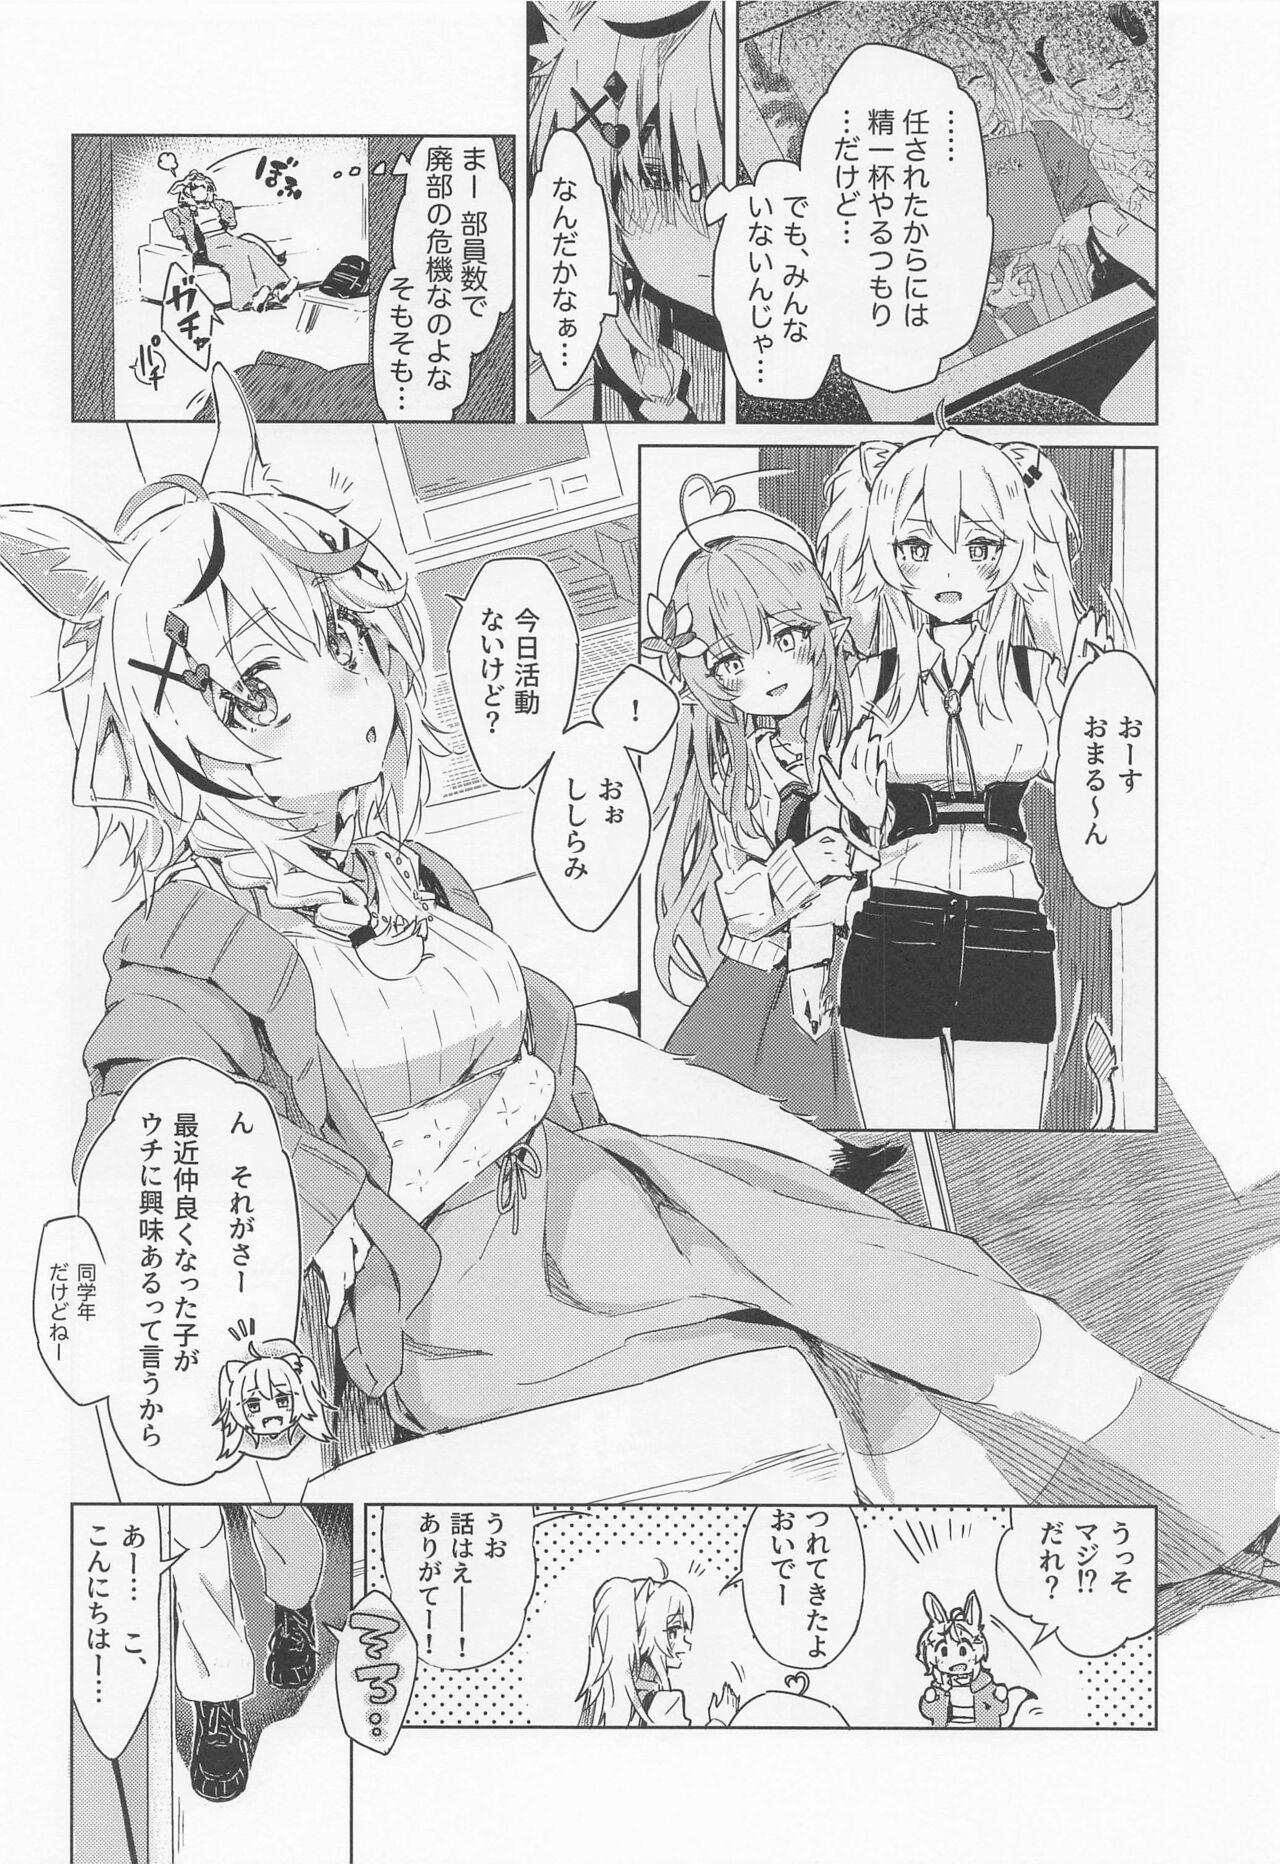 Dildos Fennec wa Iseijin no Yume o Miru ka - Does The Fennec Dream of The Lovely Visitor? - Hololive Gay - Page 3